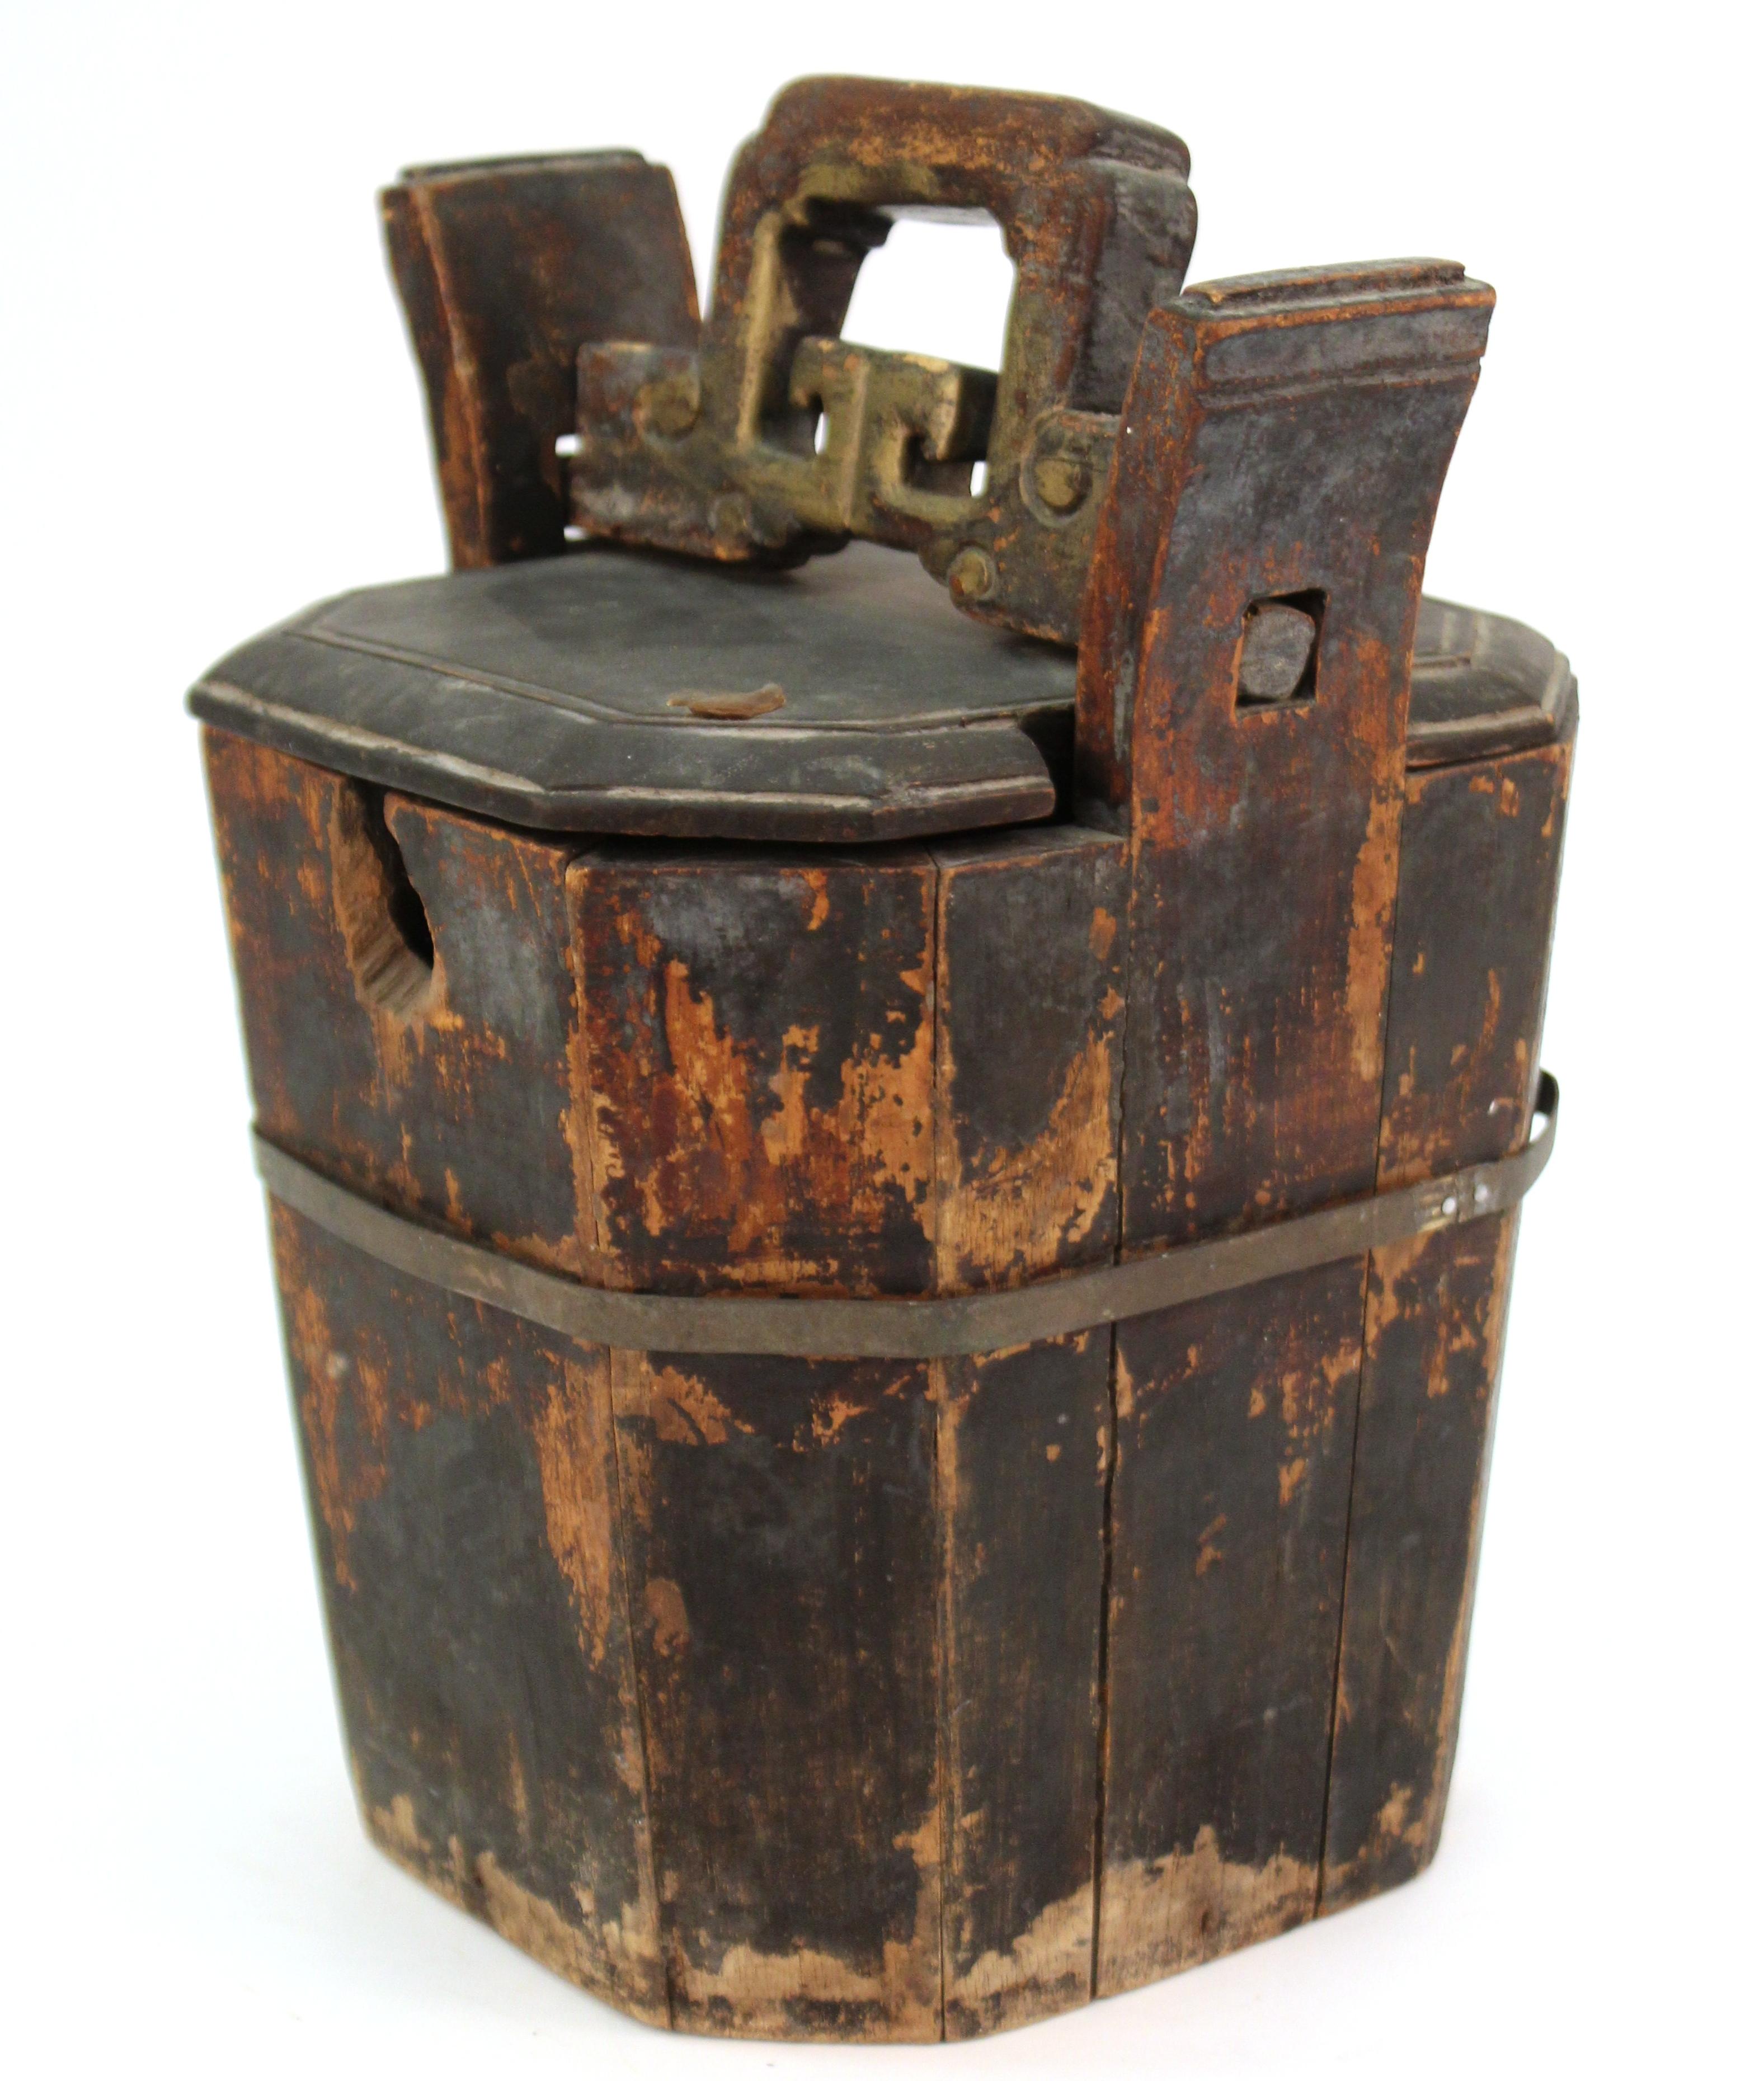 Chinese carved wood teapot caddy. The front panel has a hole opening for the spout, with a shaped wood carrying handle inserted into the ears, the lid having a partial Jian Ding wax seal from the 19th century.
Wear and losses to the gilt-painted